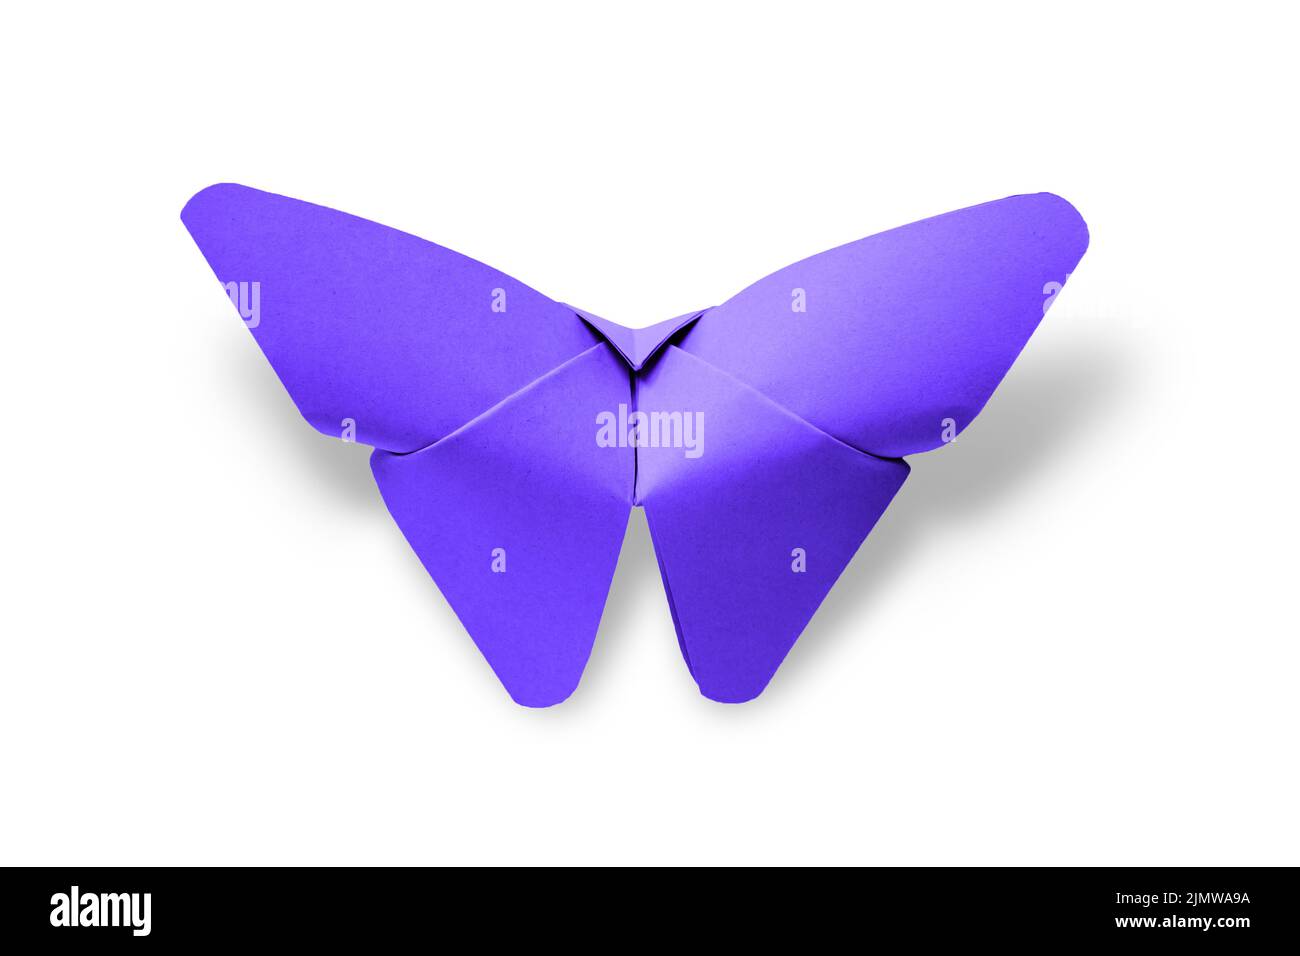 Purple paper butterfly origami isolated on a white background Stock Photo